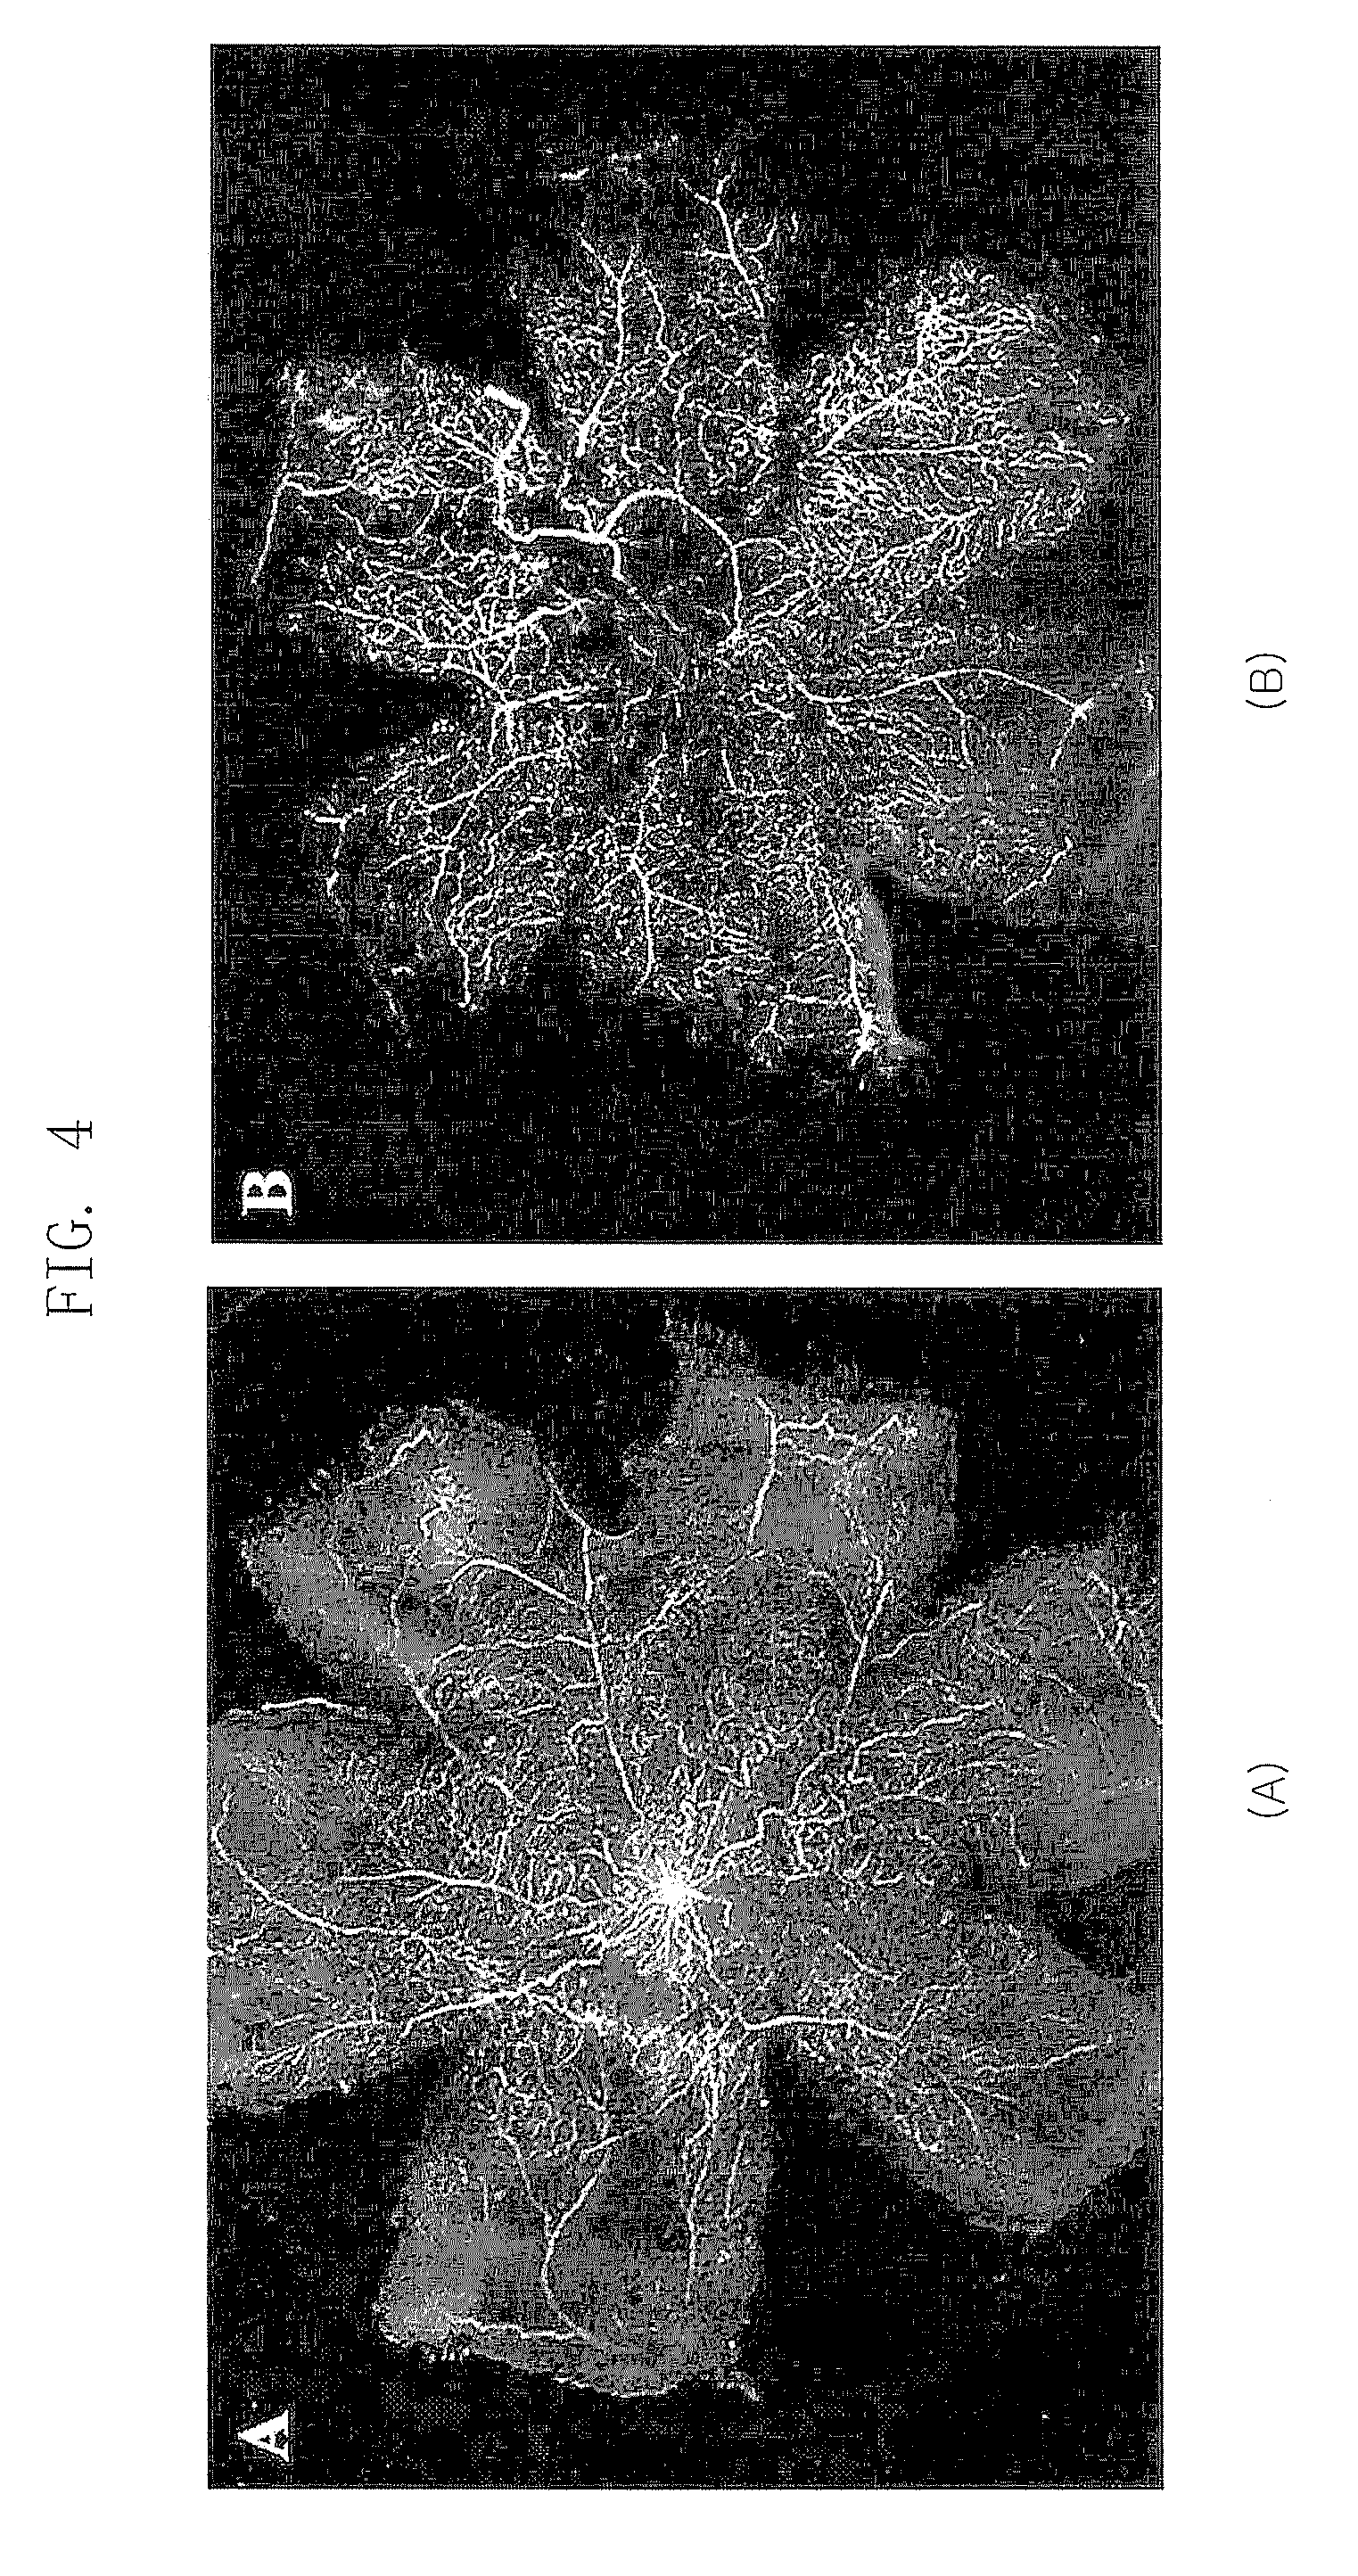 Composition for treating retinopathy or glaucoma comprising thrombin derived peptides